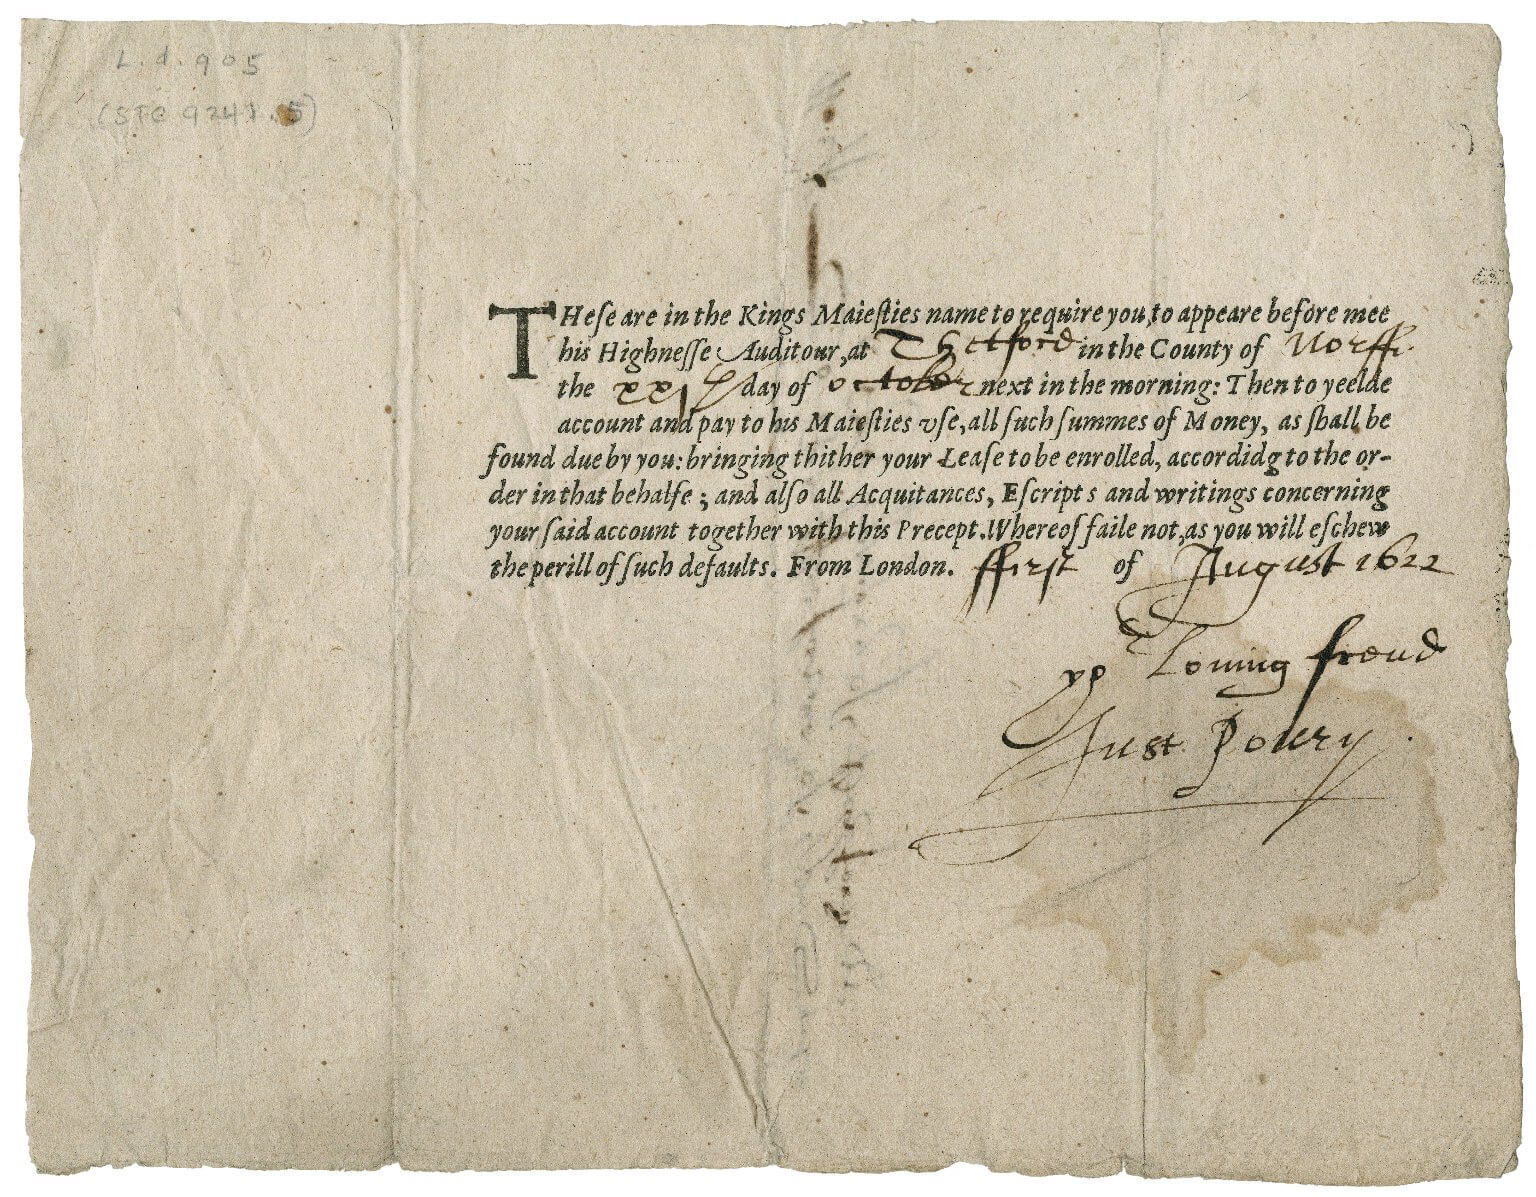 This summons to appear before the King's exchequer is a typical printed form---the parts that are the standard formula are printed, while the specifics of dates and places are filled in by hand.